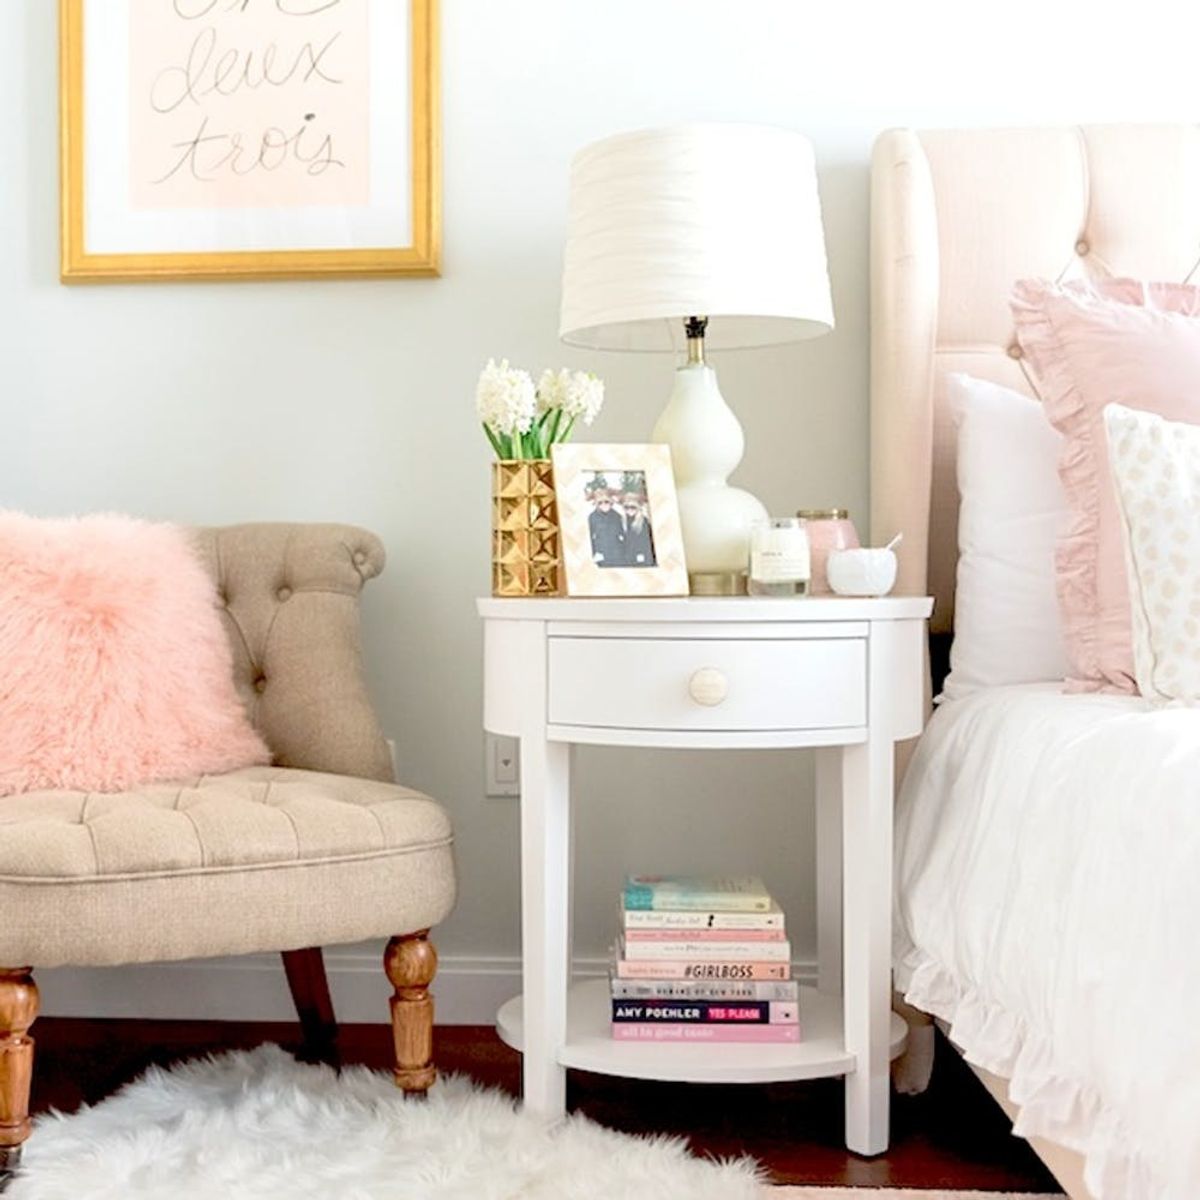 This Fashion Blogger’s Bedroom Makeover Is Super Stylish *and* Budget-Friendly